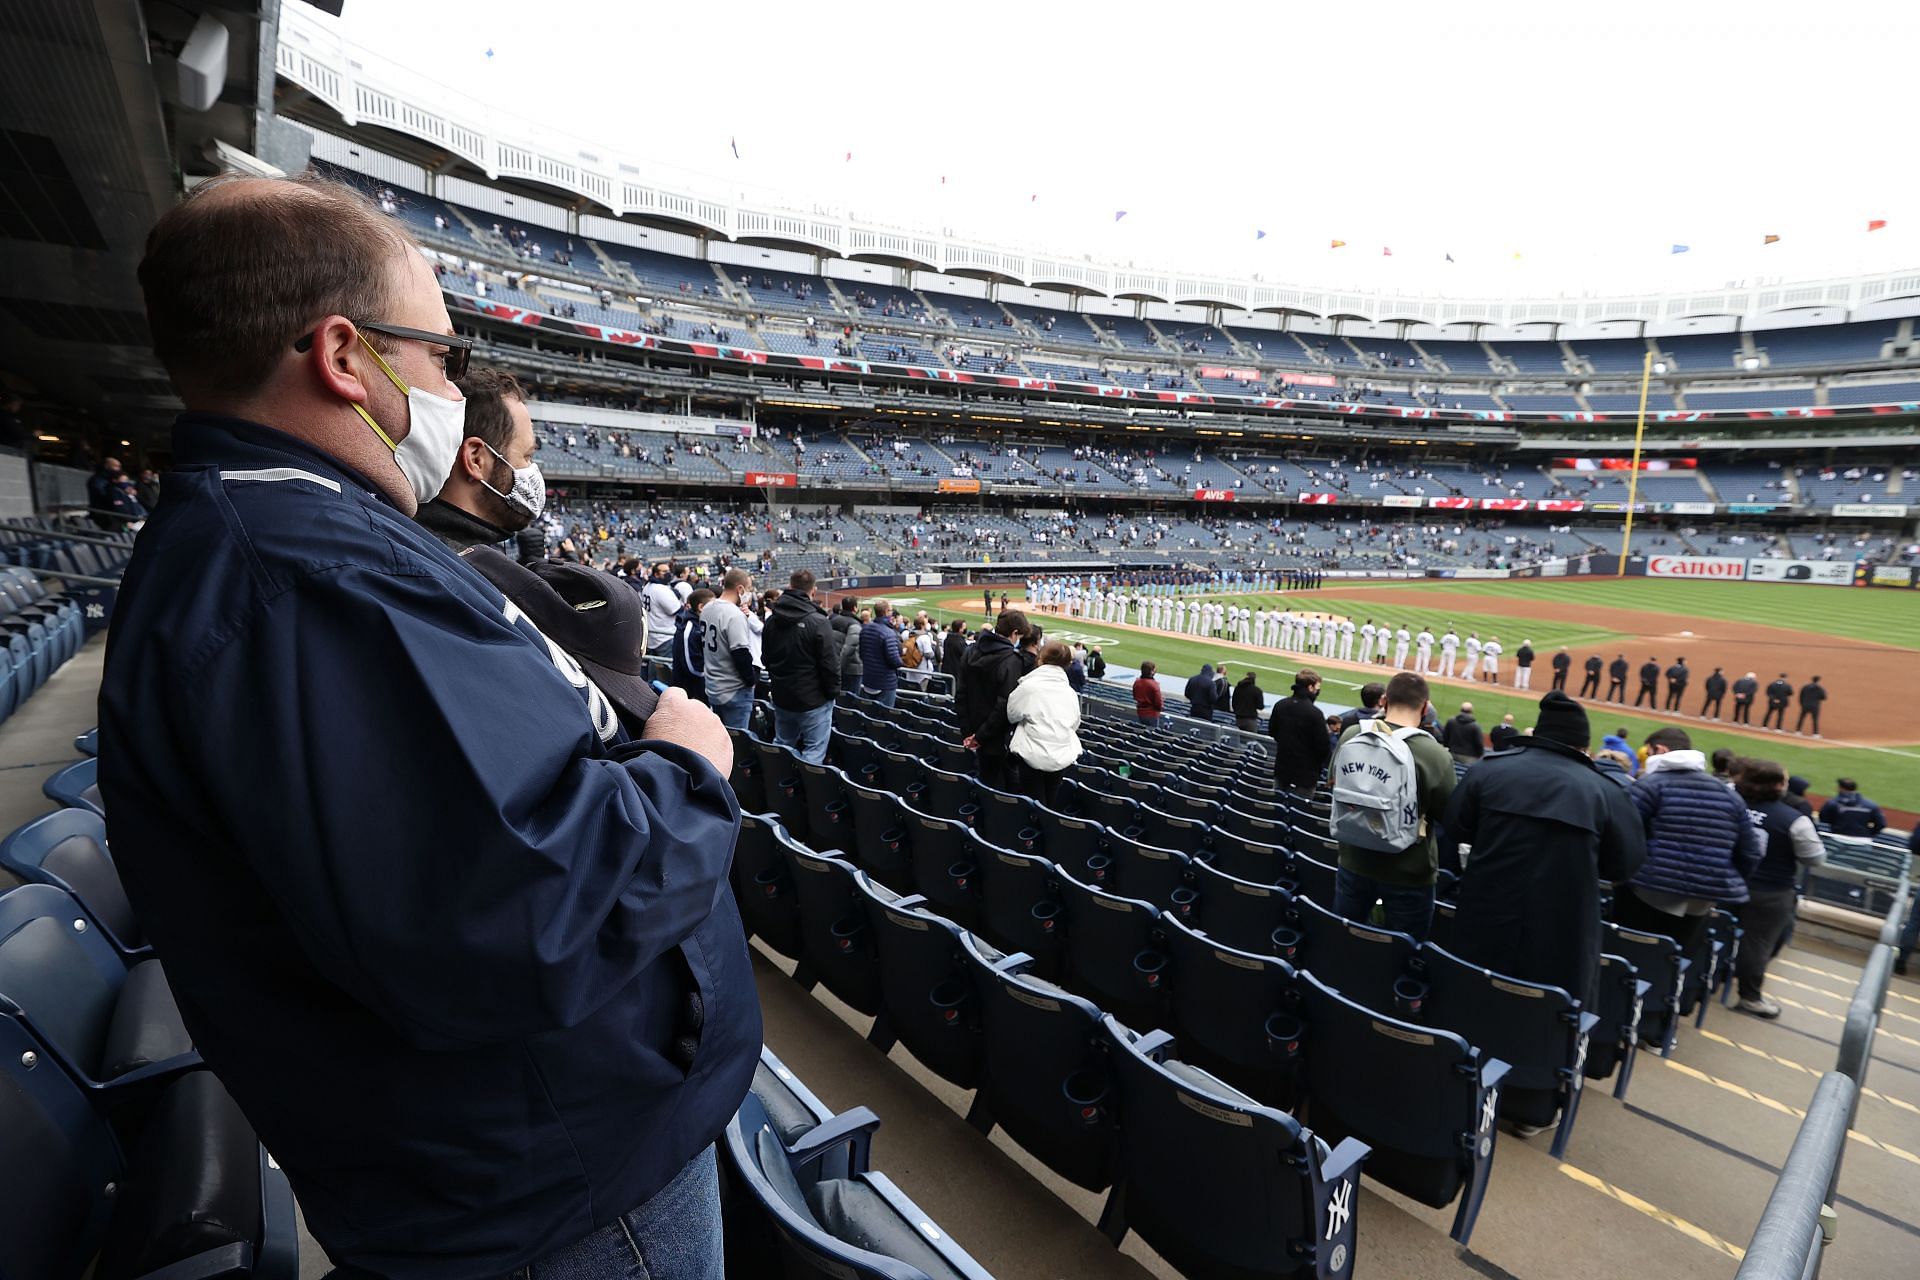 New York Yankees on X: #Yankees fans show their support for Boston.  #BostonStrong  / X